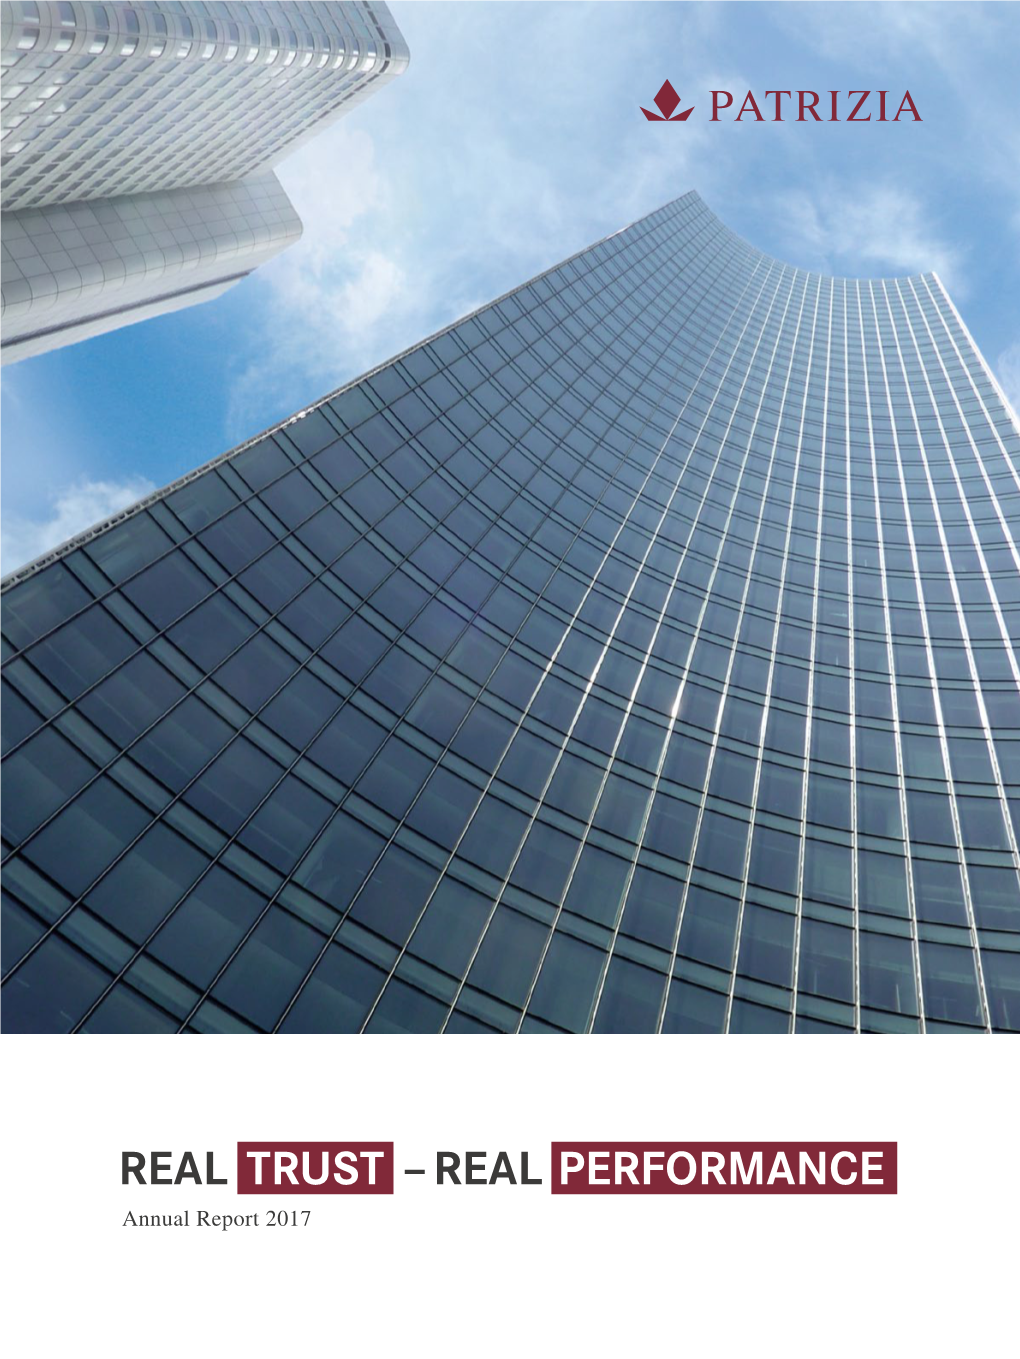 REAL TRUST – REAL PERFORMANCE Annual Report 2017 KEY FIGURESASSETS UNDER MANAGEMENT (EUR 21.9BN) in DETAIL